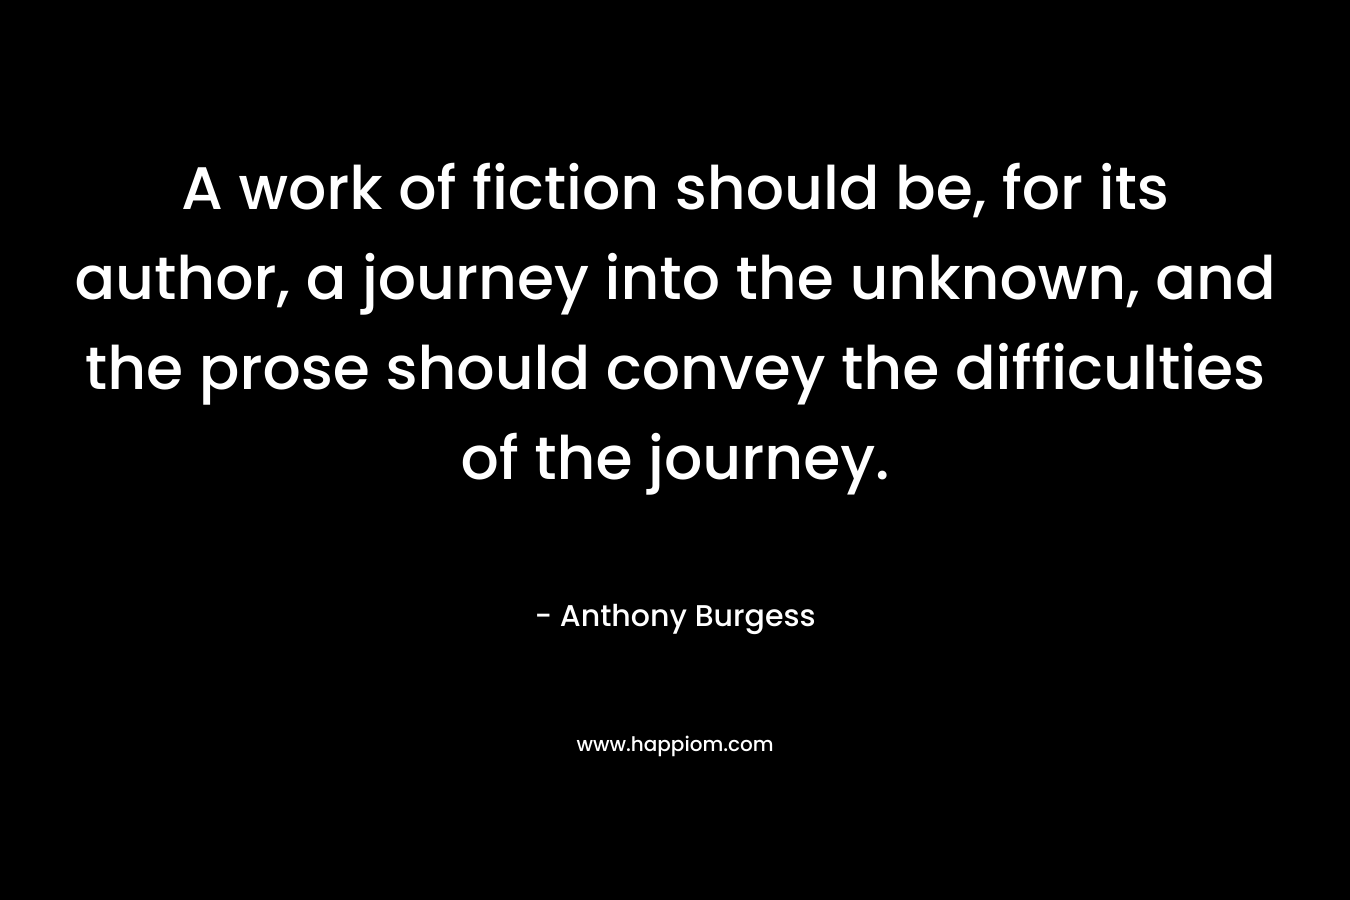 A work of fiction should be, for its author, a journey into the unknown, and the prose should convey the difficulties of the journey. – Anthony Burgess